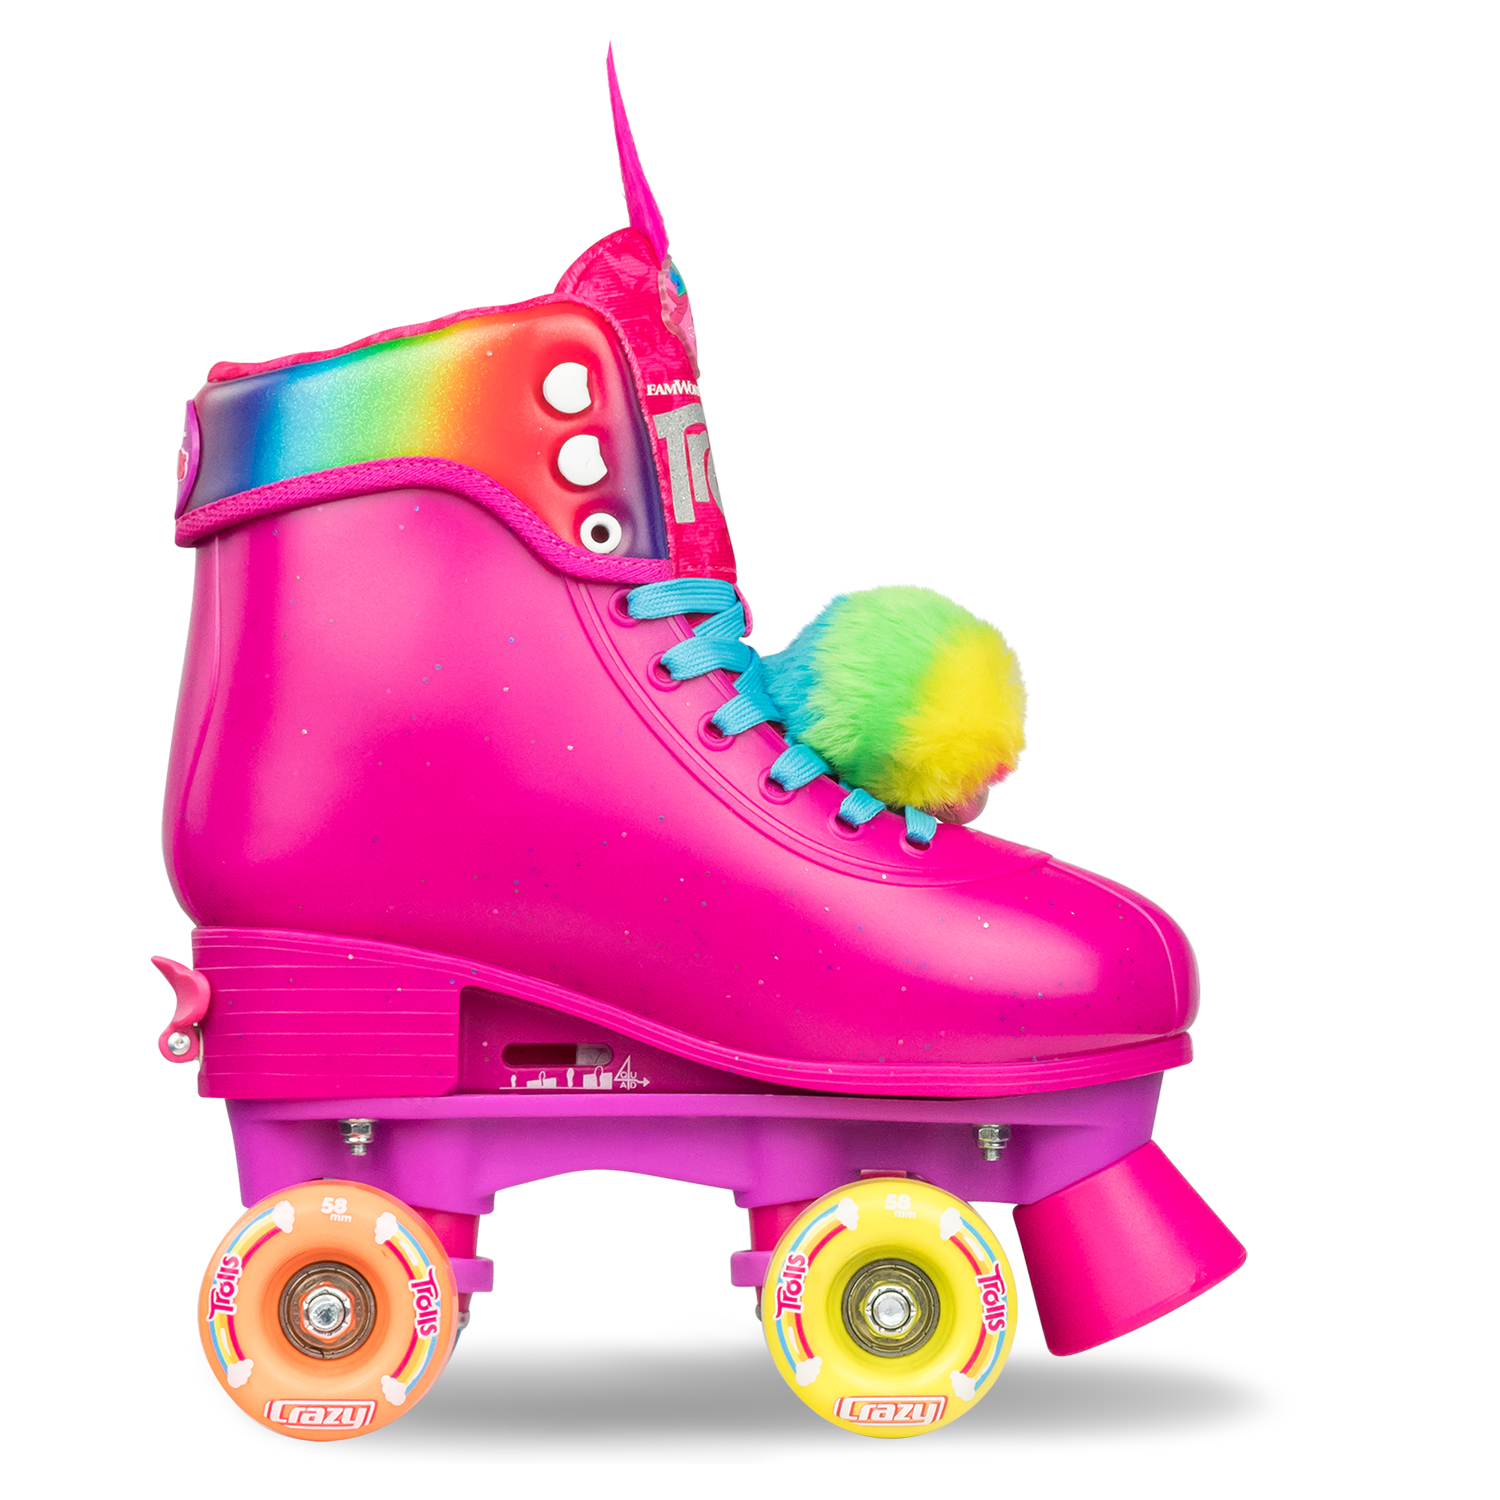 Skating Toddler! Roller Skating Adventure! Learn to skate at the